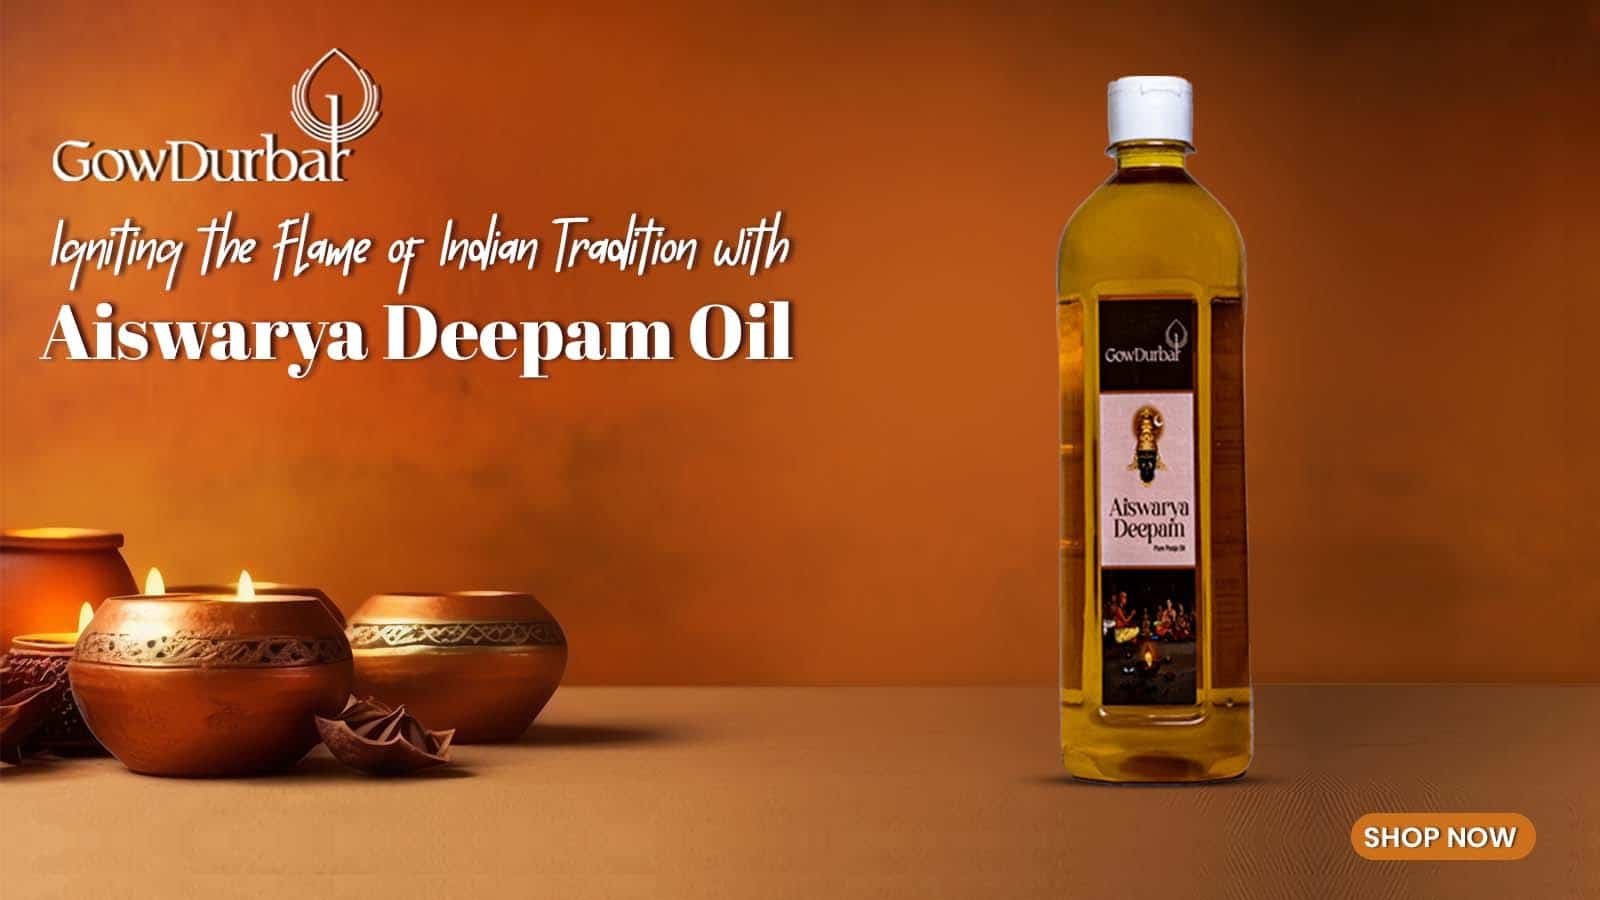 Igniting the Flame of Indian Tradition with Aiswarya Deepam Oil